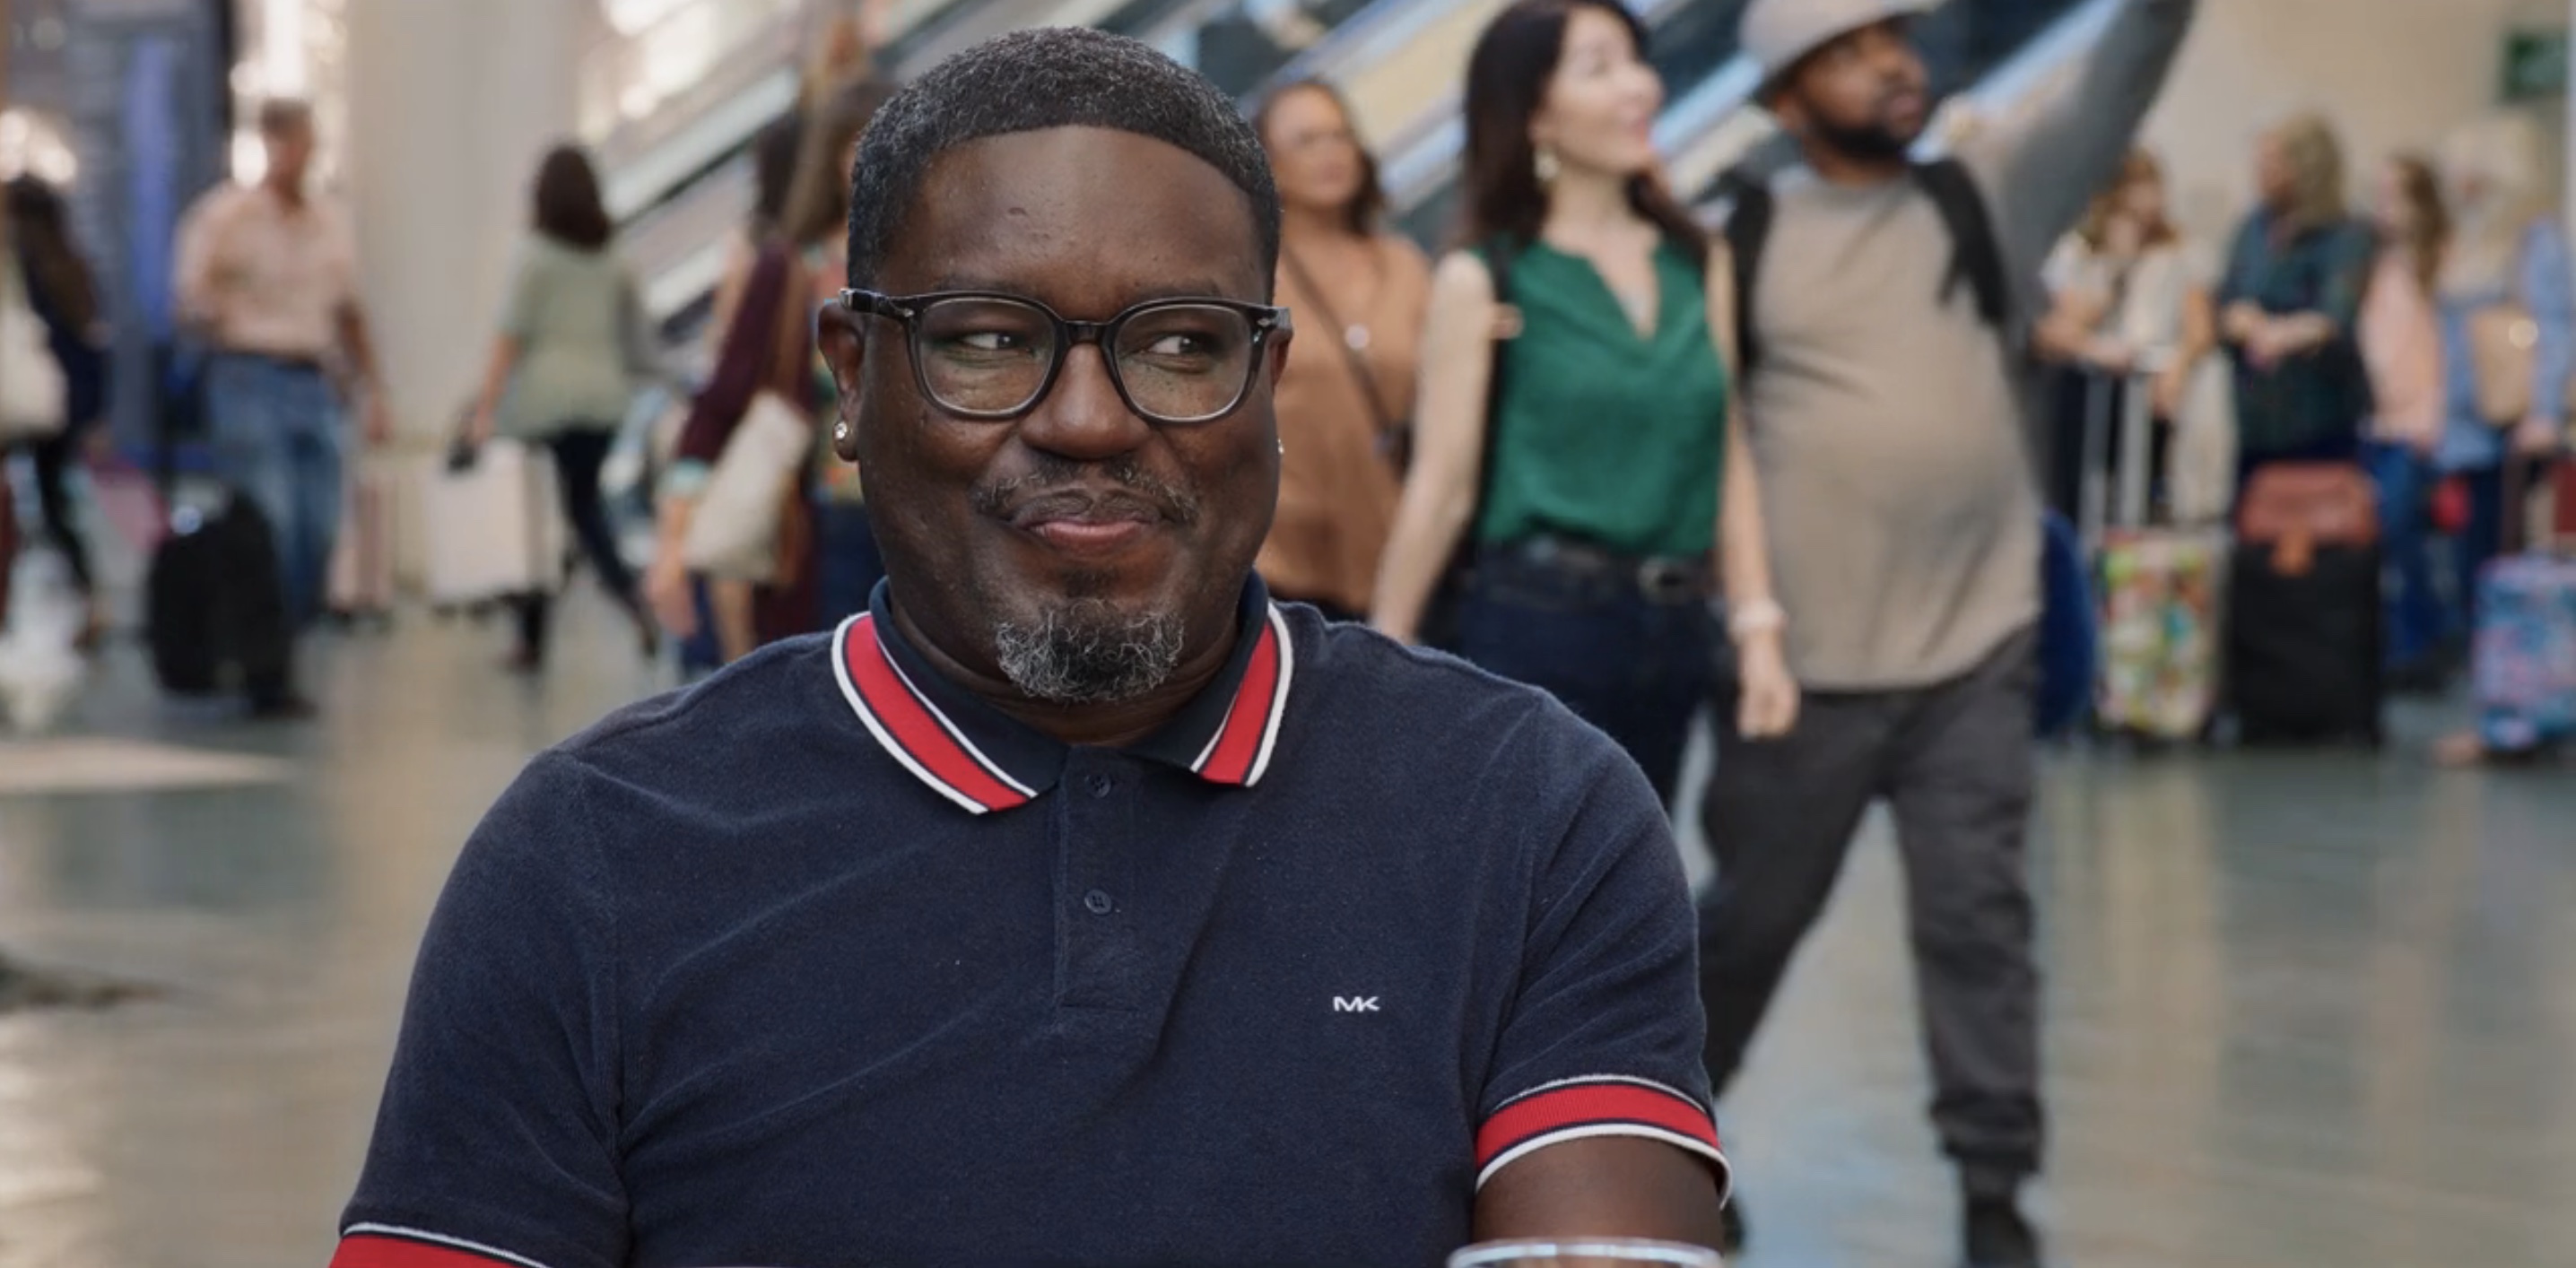 Vacation Friends 2 Cast on Hulu - Lil Rel Howery as Marcus